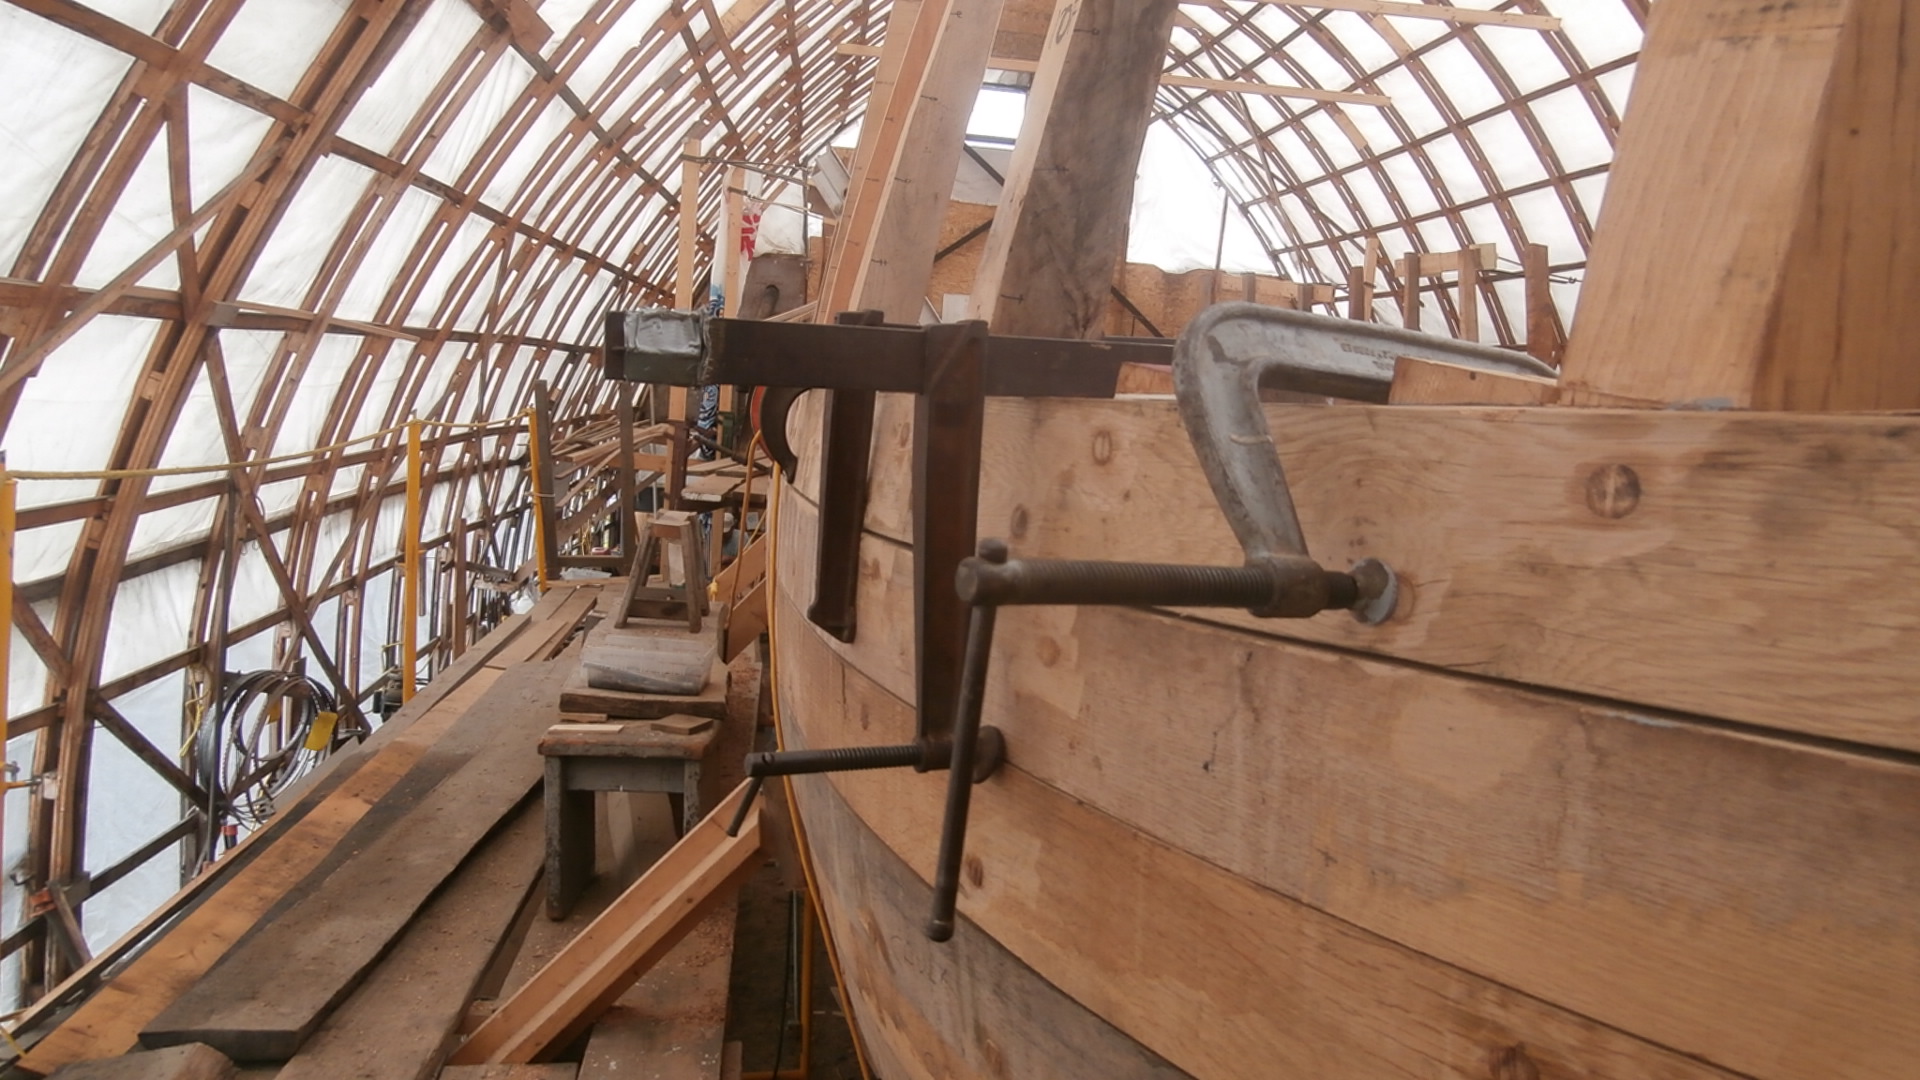 Replica of the ‘Virginia’ being built in Bath